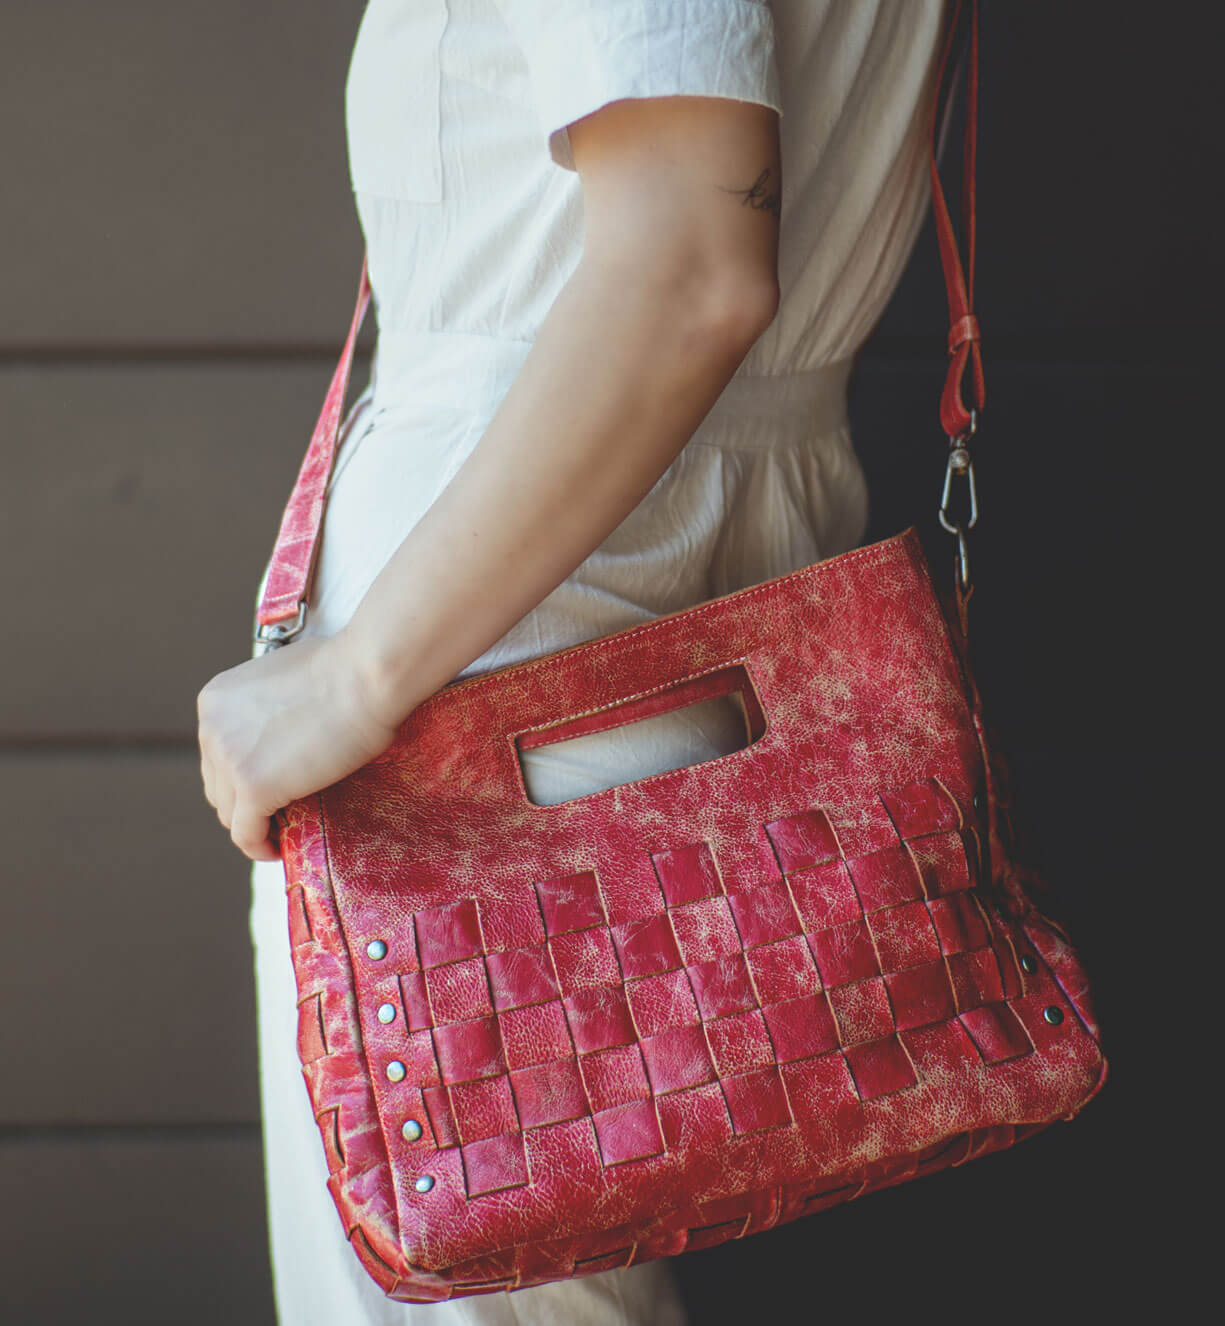 A woman is holding a red Orchid handbag by Bed Stu.